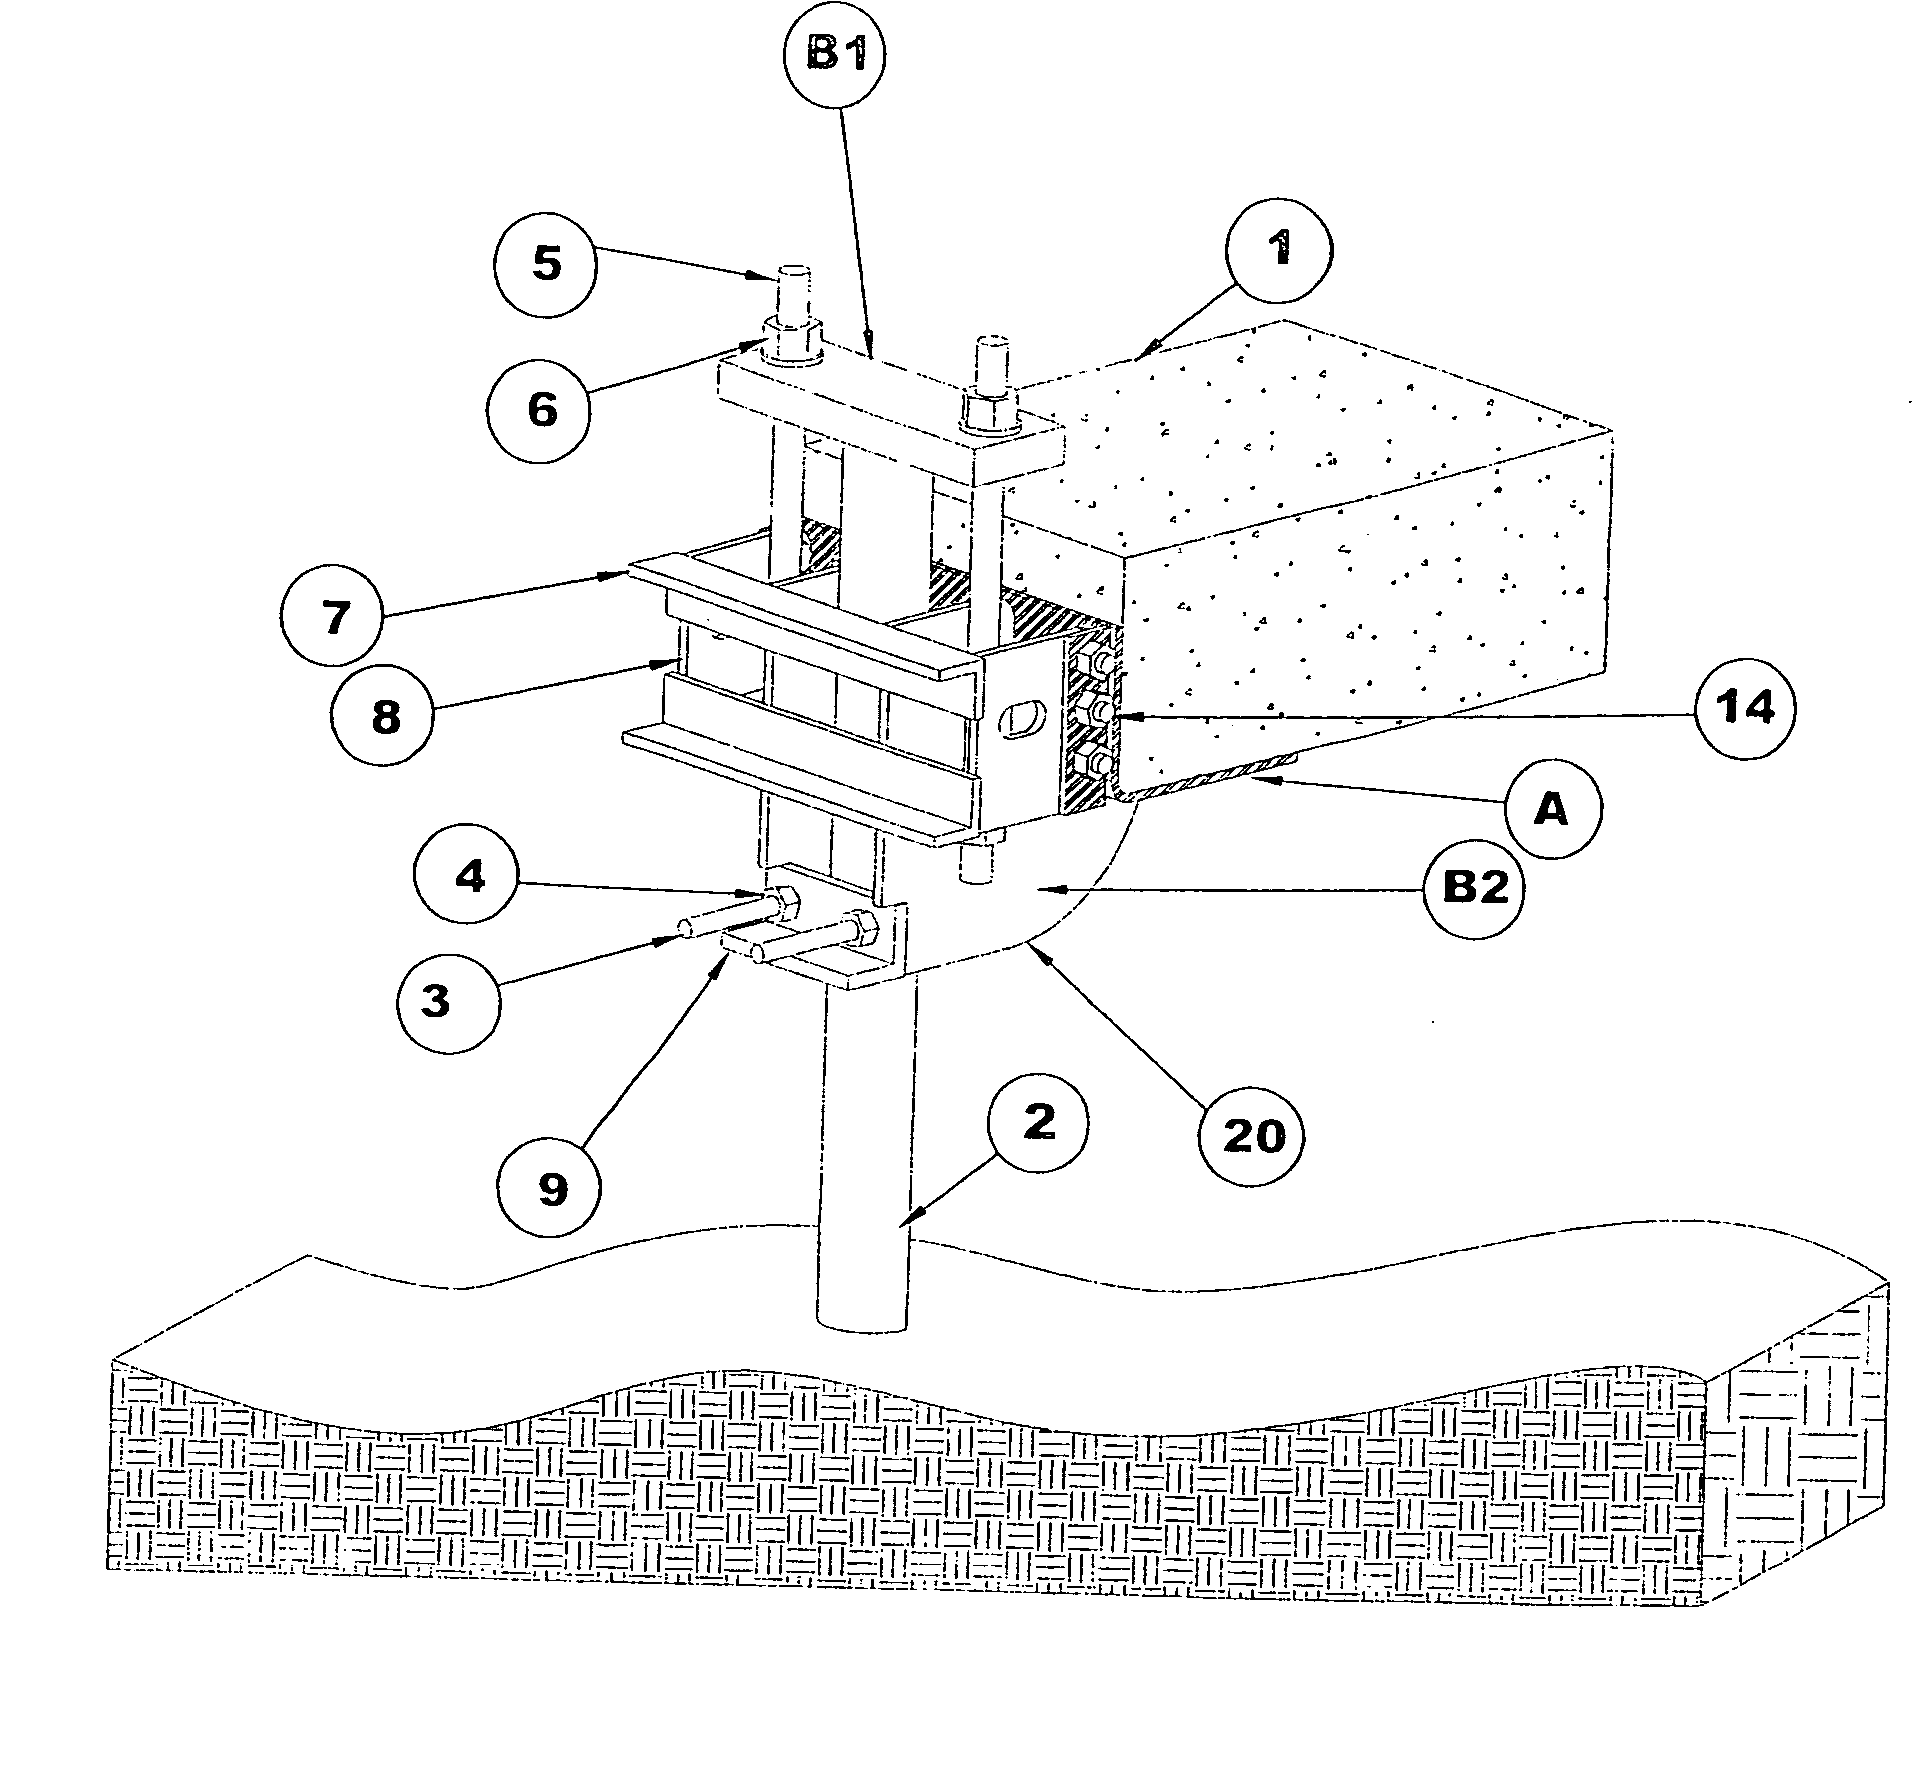 Multiple piece bracket assembly for lifting and supporting a structure